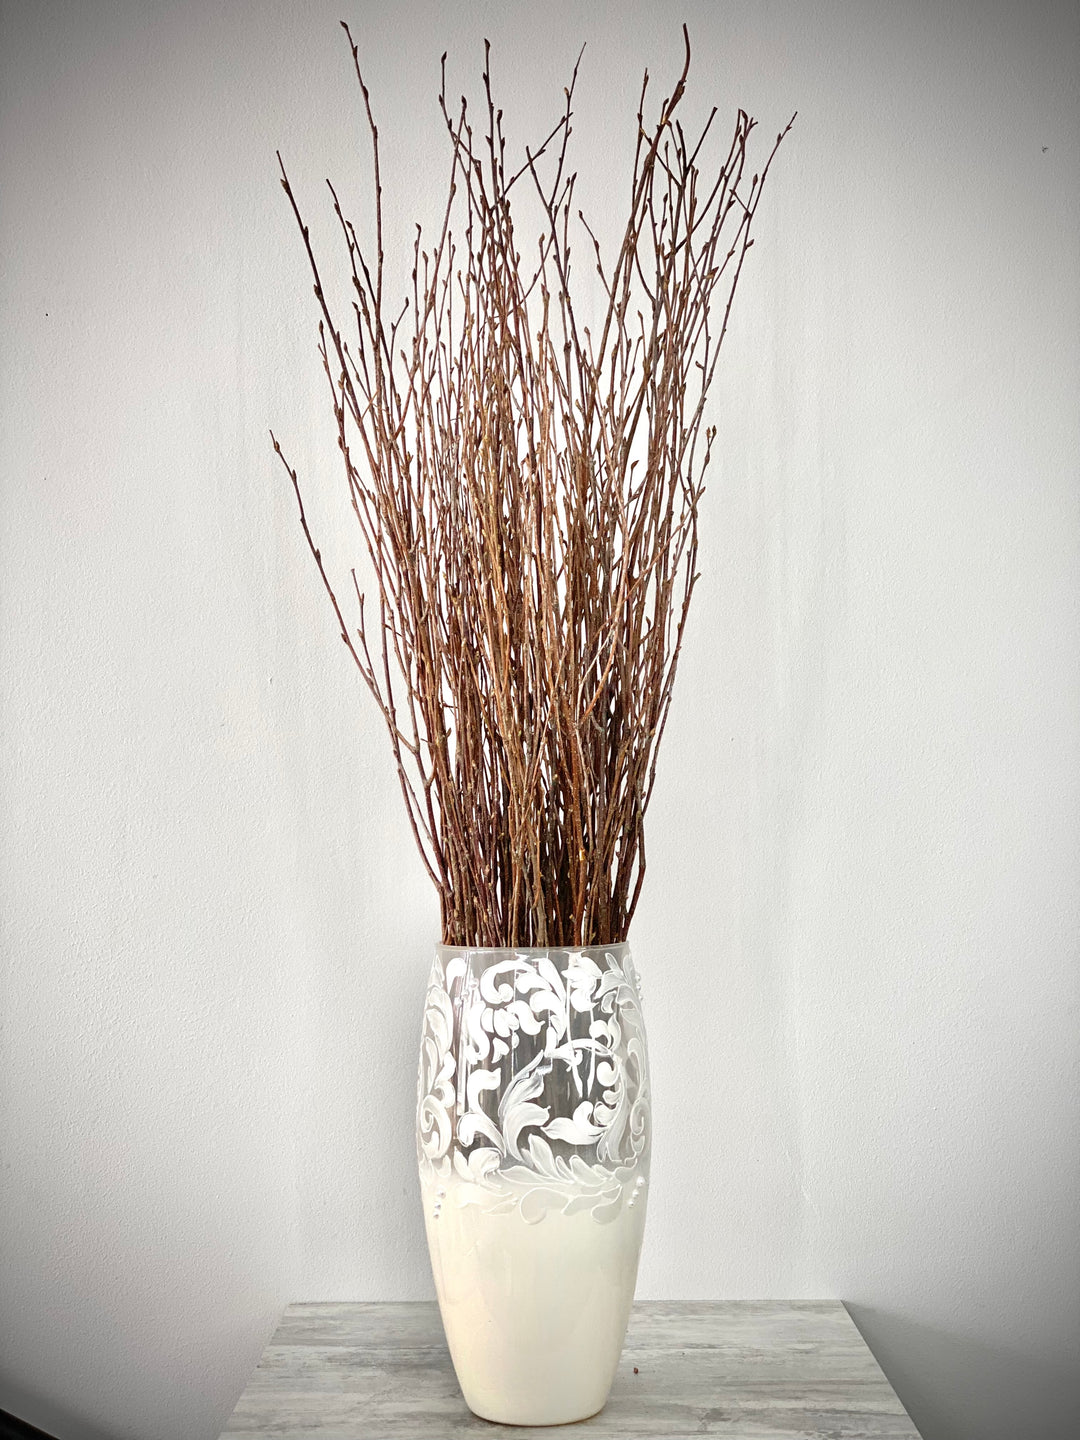 ECOVENIK 25 psc - Black Birch Branches - 73 cm, Natural Birch Twigs, Pack  of 20-25 Stems, Long for Floor vases, 29 inch…